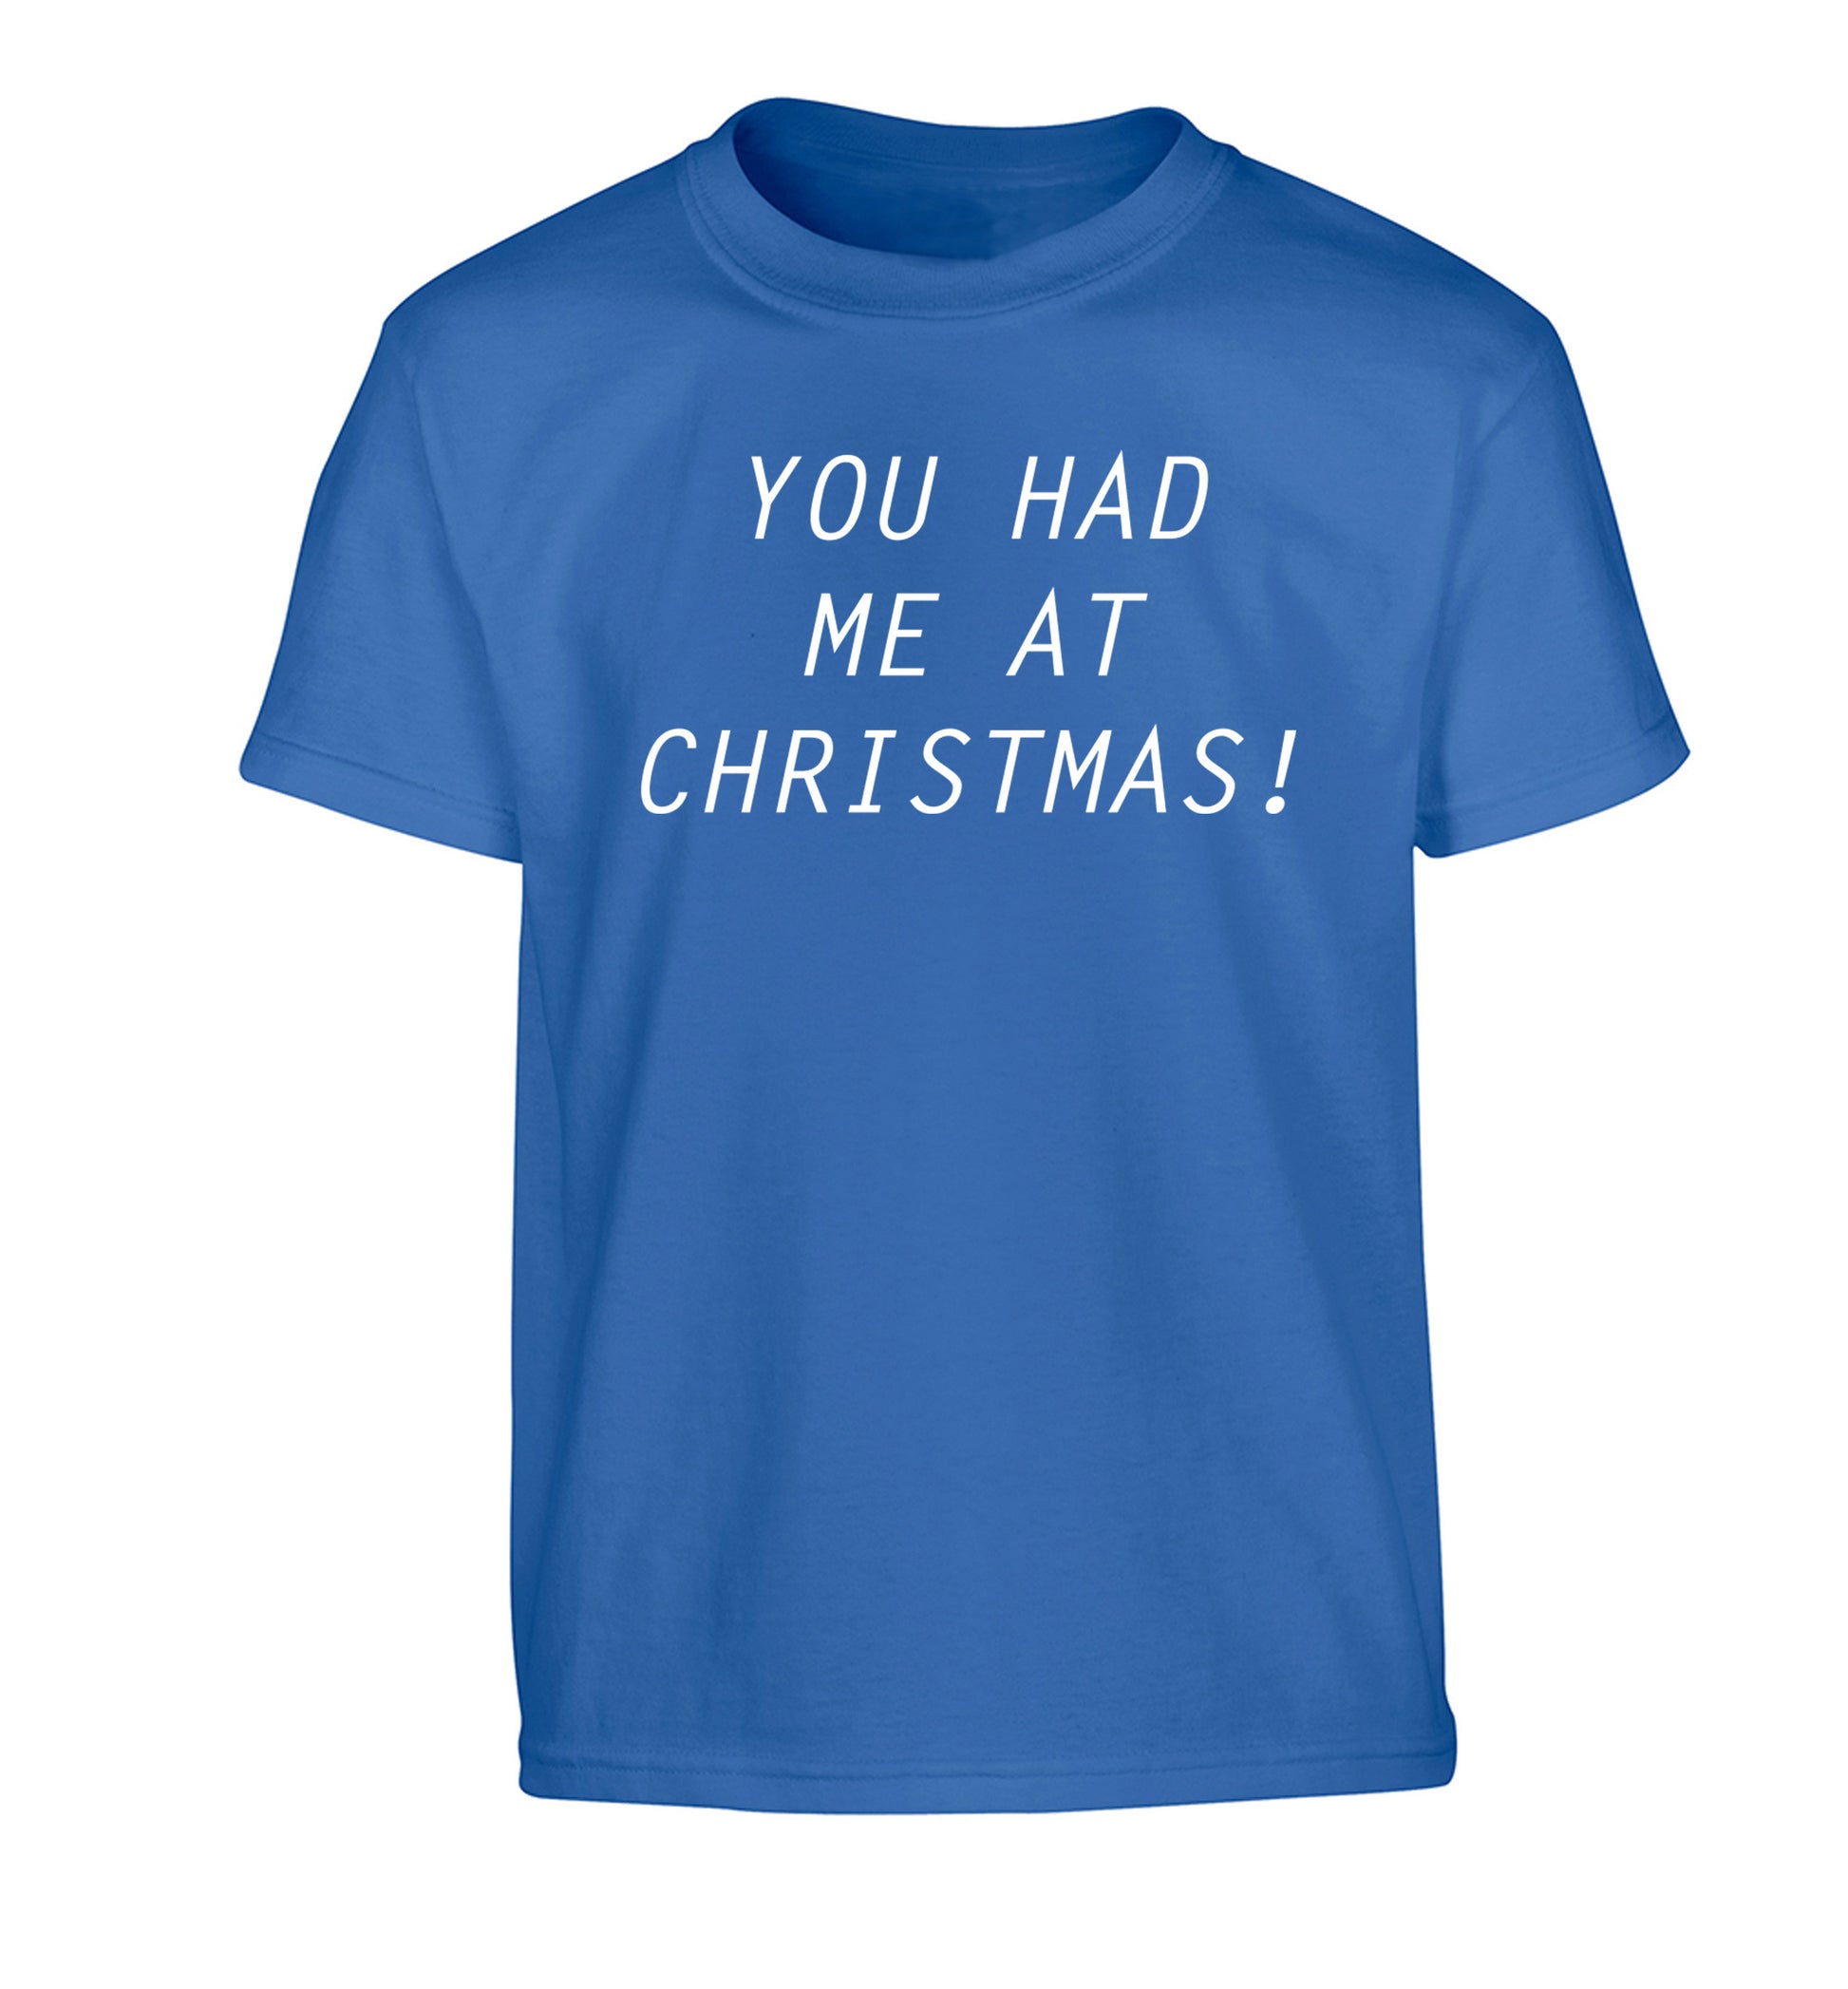 You had me at Christmas Children's blue Tshirt 12-14 Years